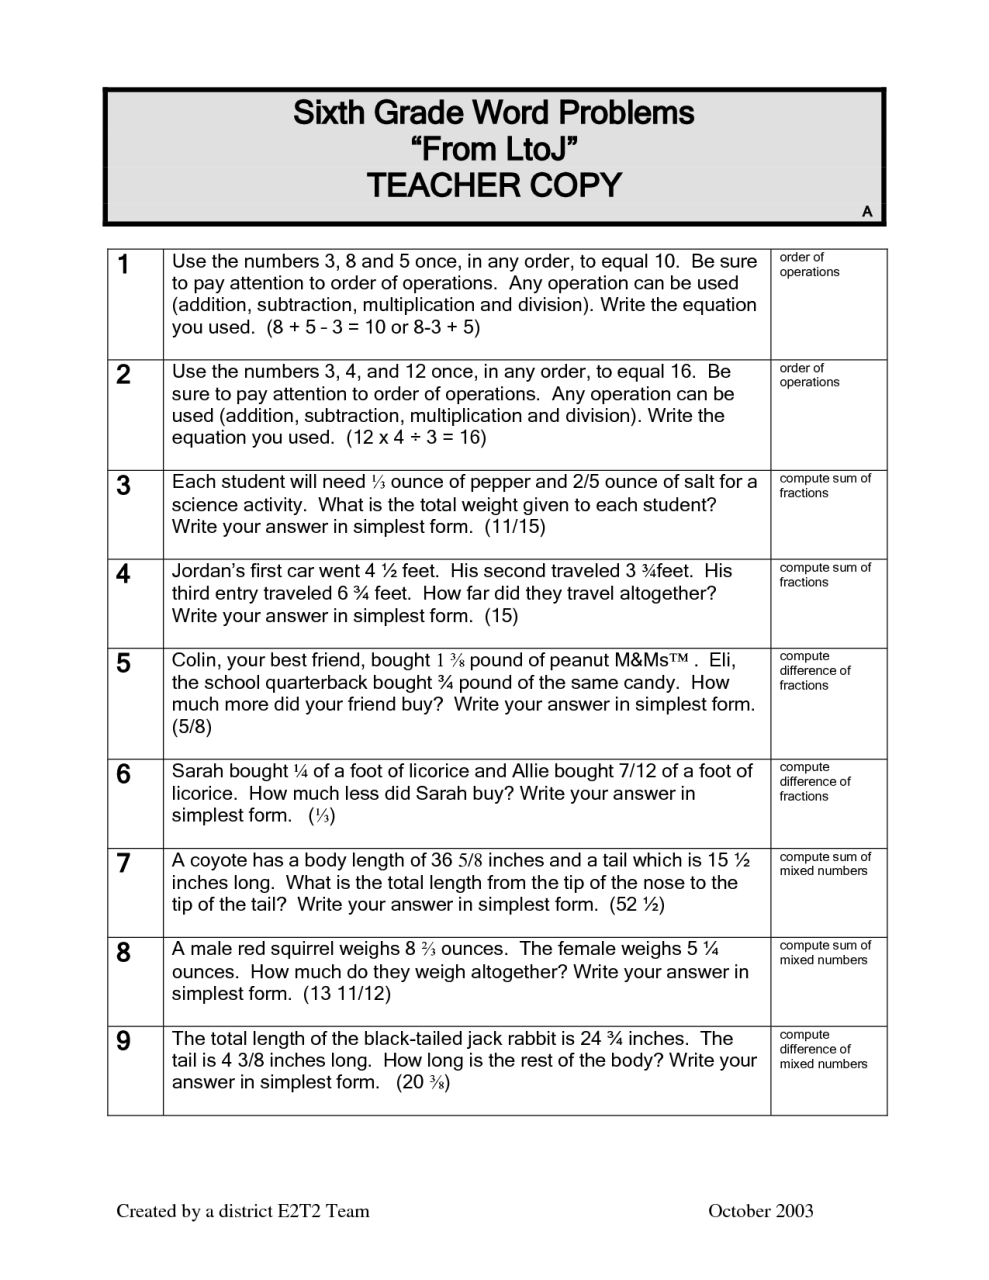 Grade 6 » Introduction Common Core State Standards Initiative